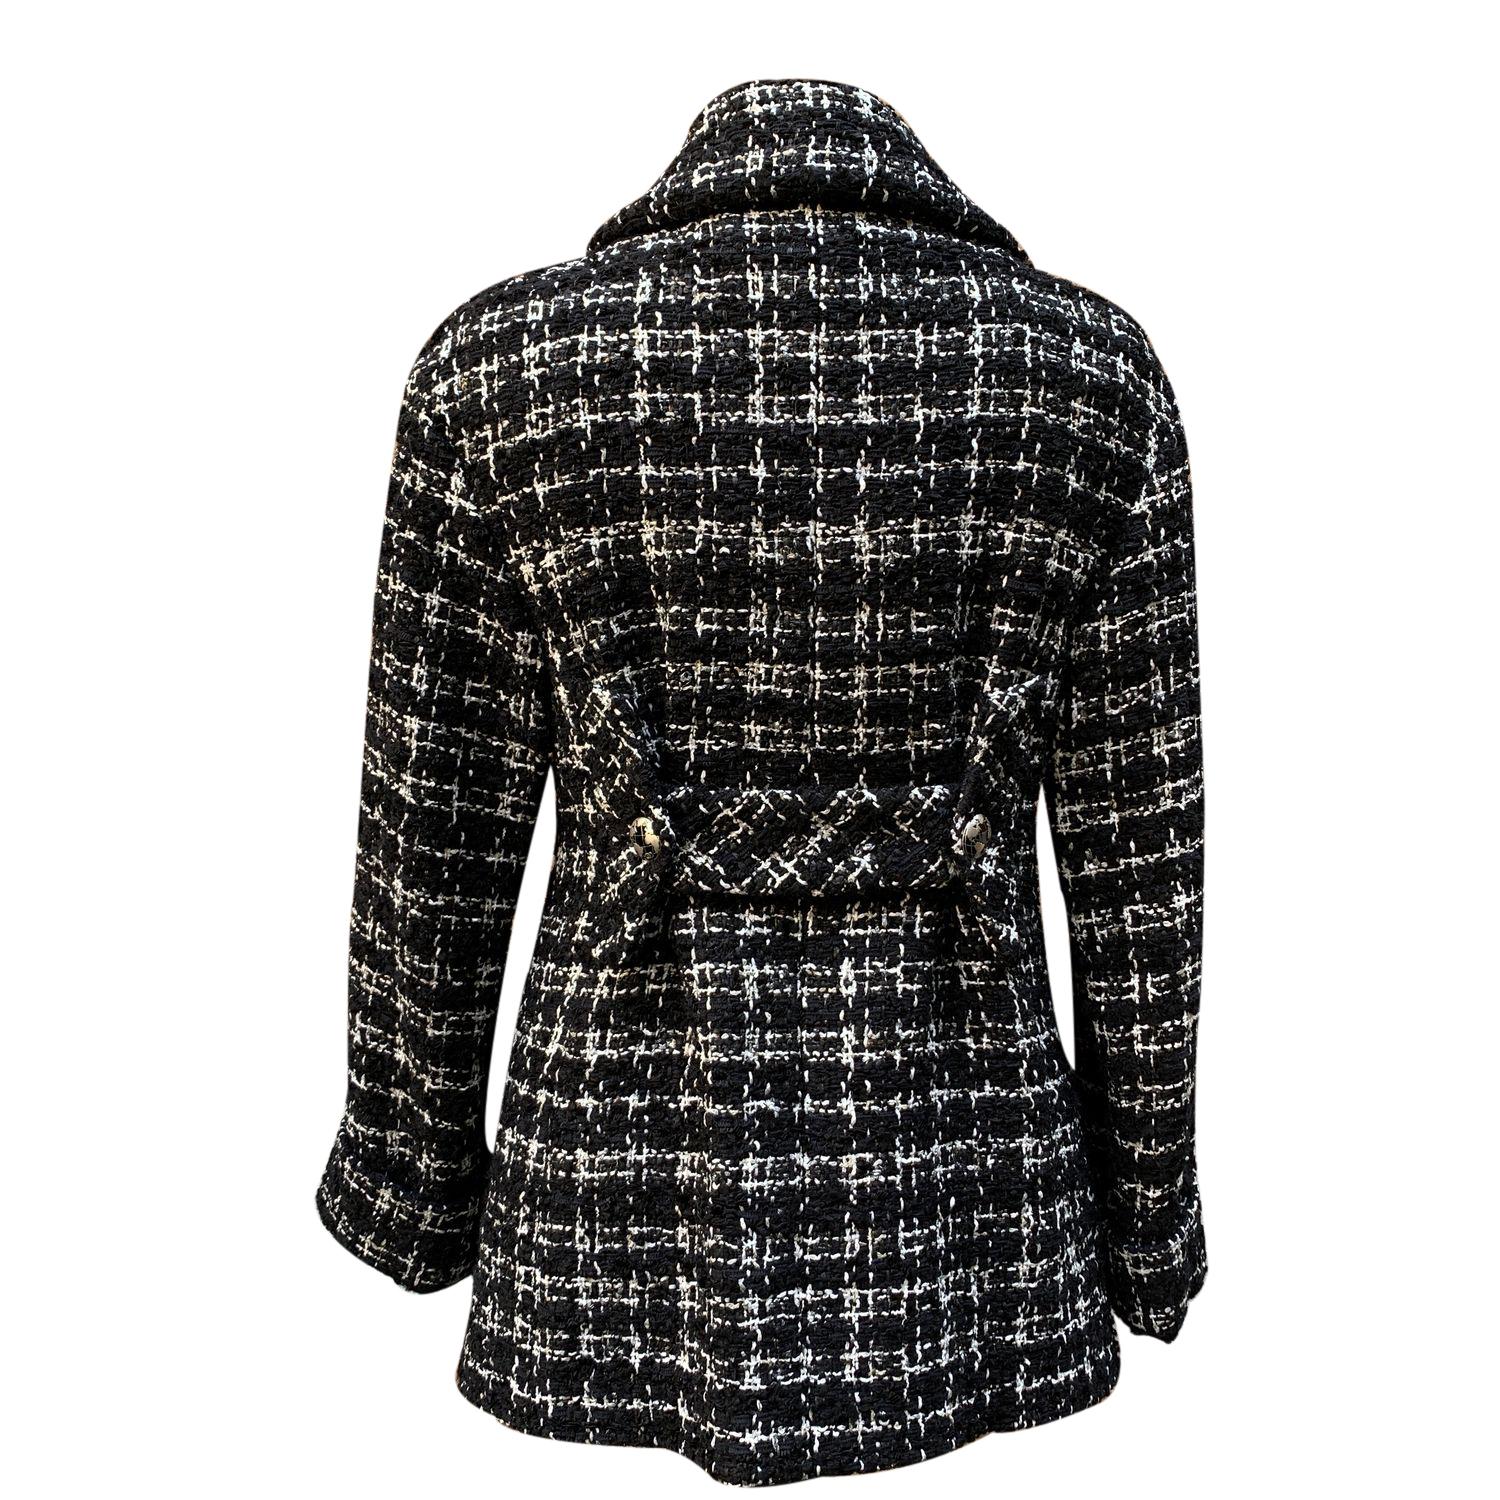 Chanel Black and White Tweed Planisphere Jacket Size 38 FR In Excellent Condition In Rome, Rome